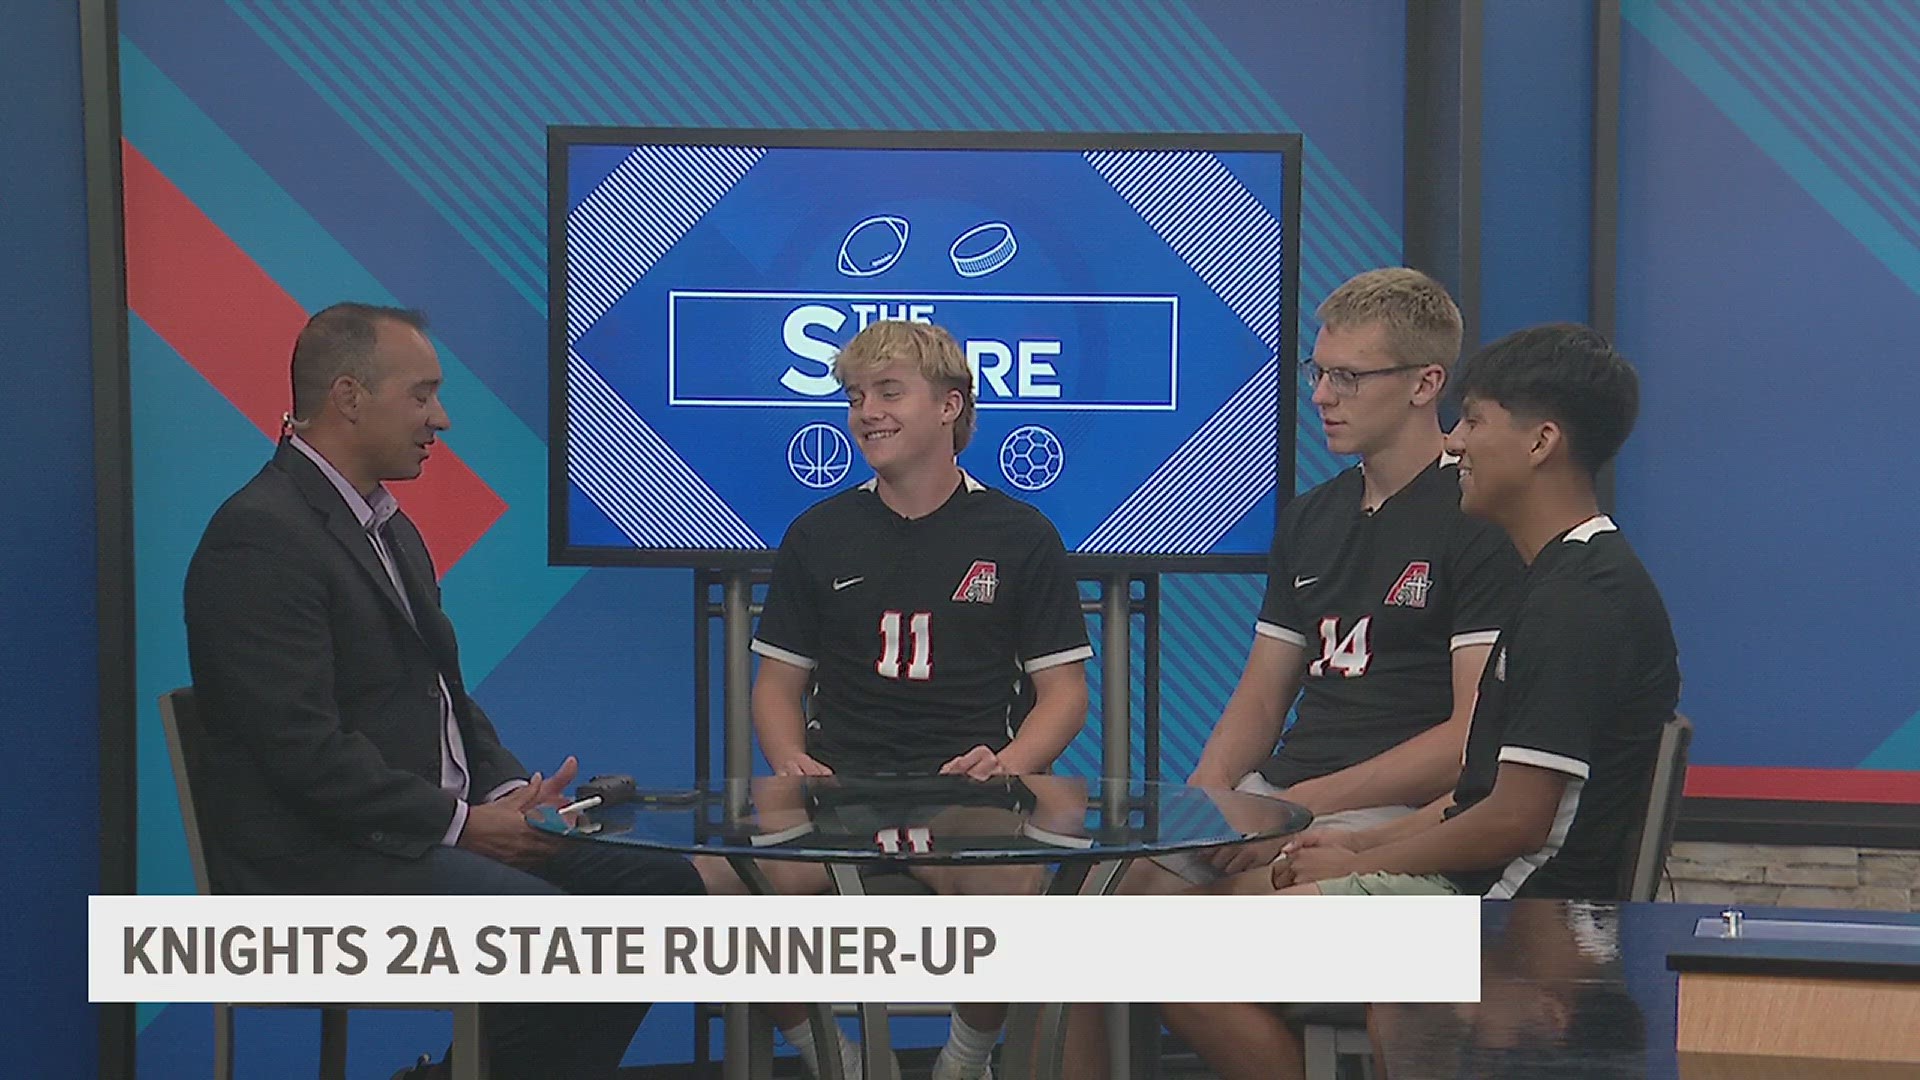 Assumption Boys Soccer finishes as 2A State Runner-up. The Knights talk about their great season.